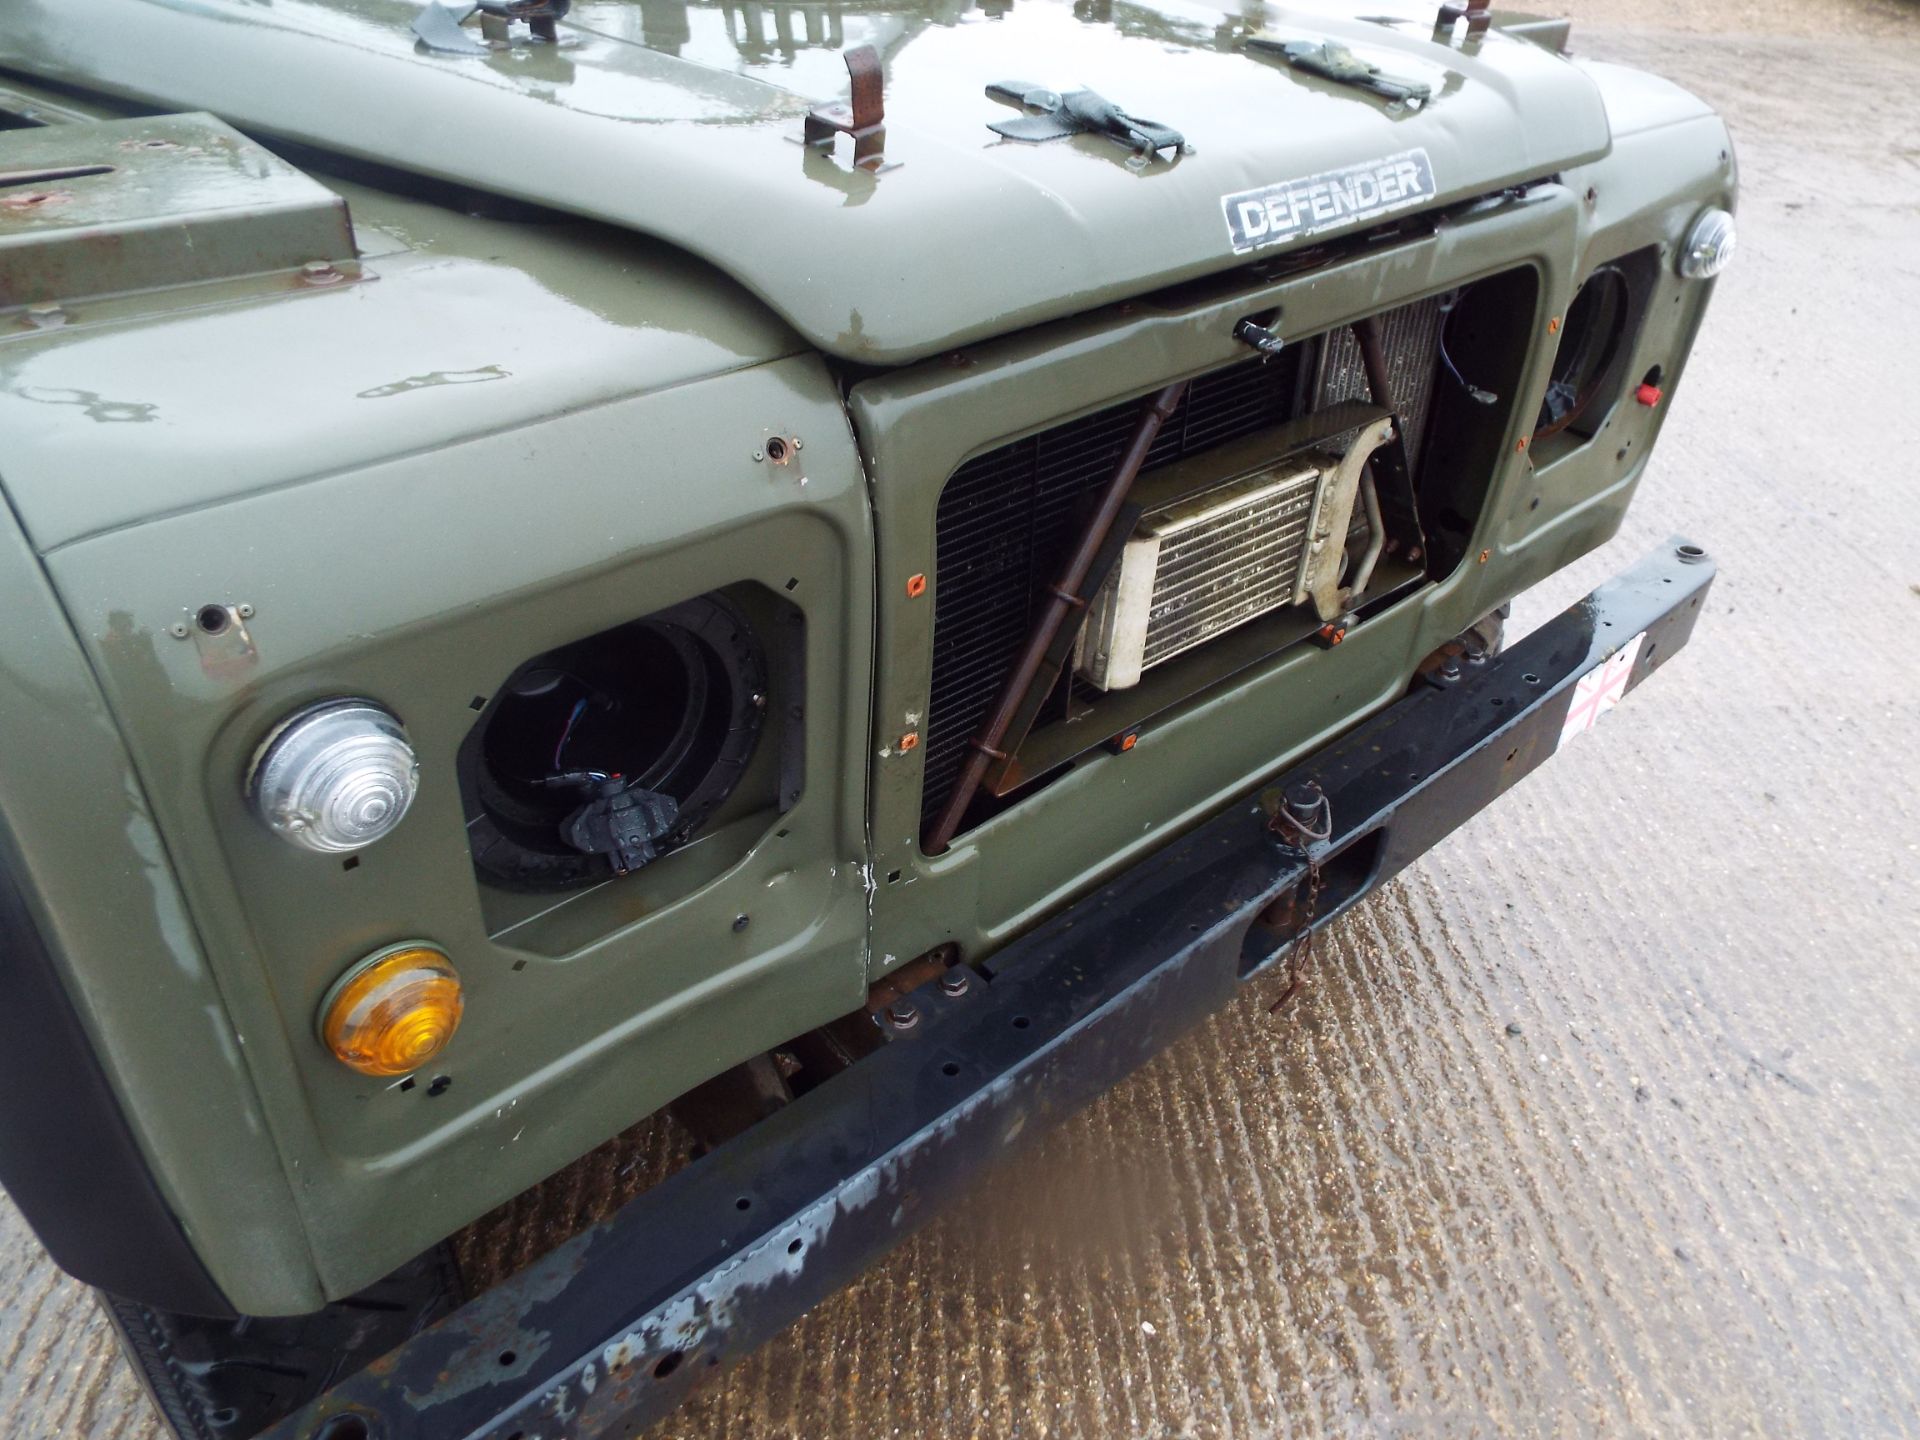 Military Specification Land Rover Wolf 90 Soft Top - Image 23 of 24